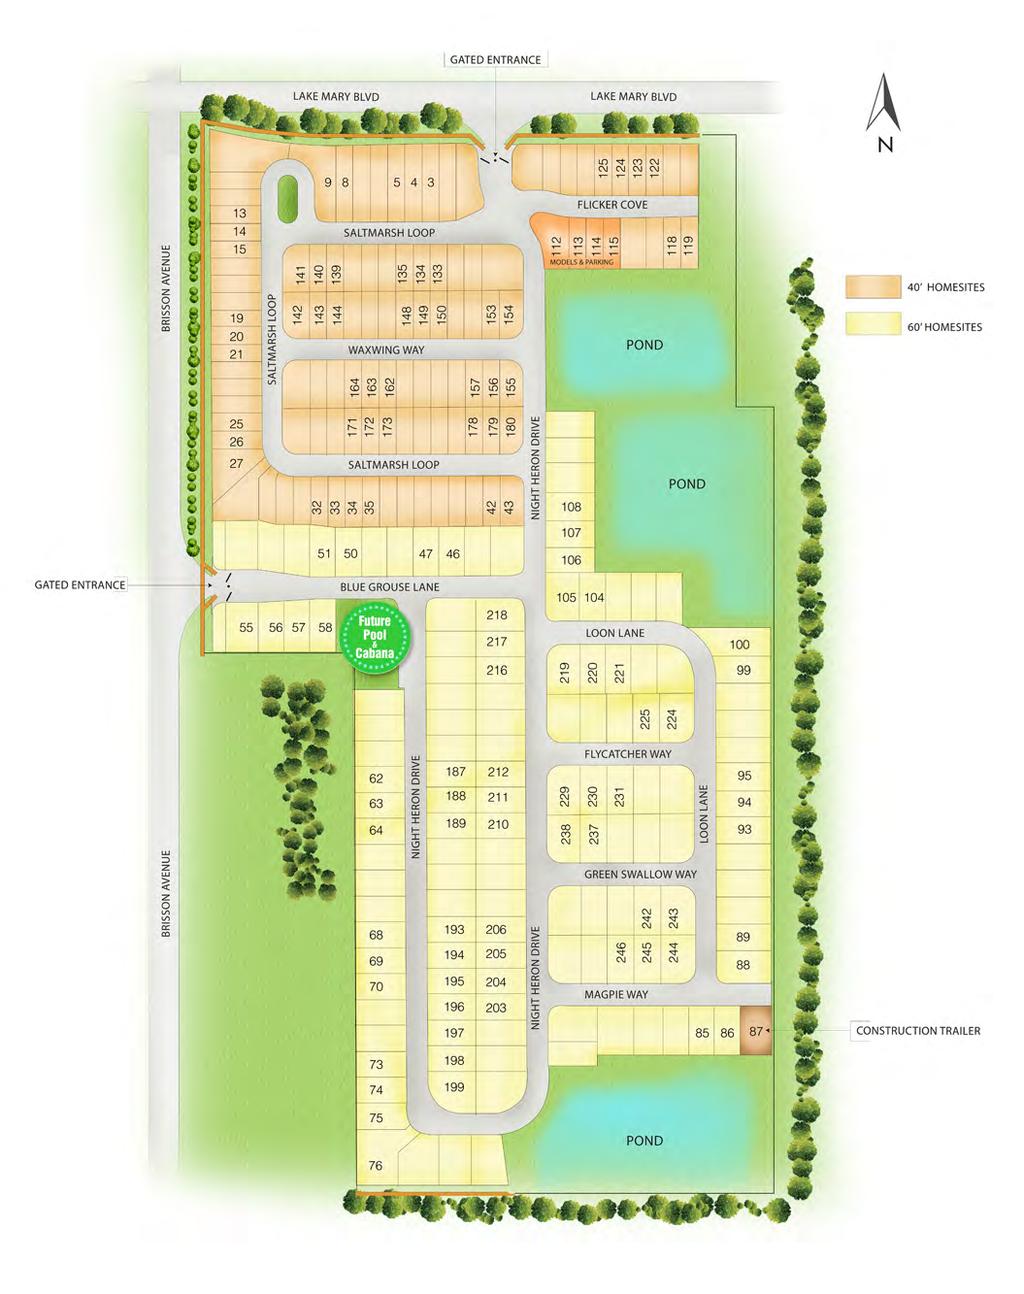 SITEMAP Wyndham Preserve This plan is based on current development plans which are subject to change without notice.